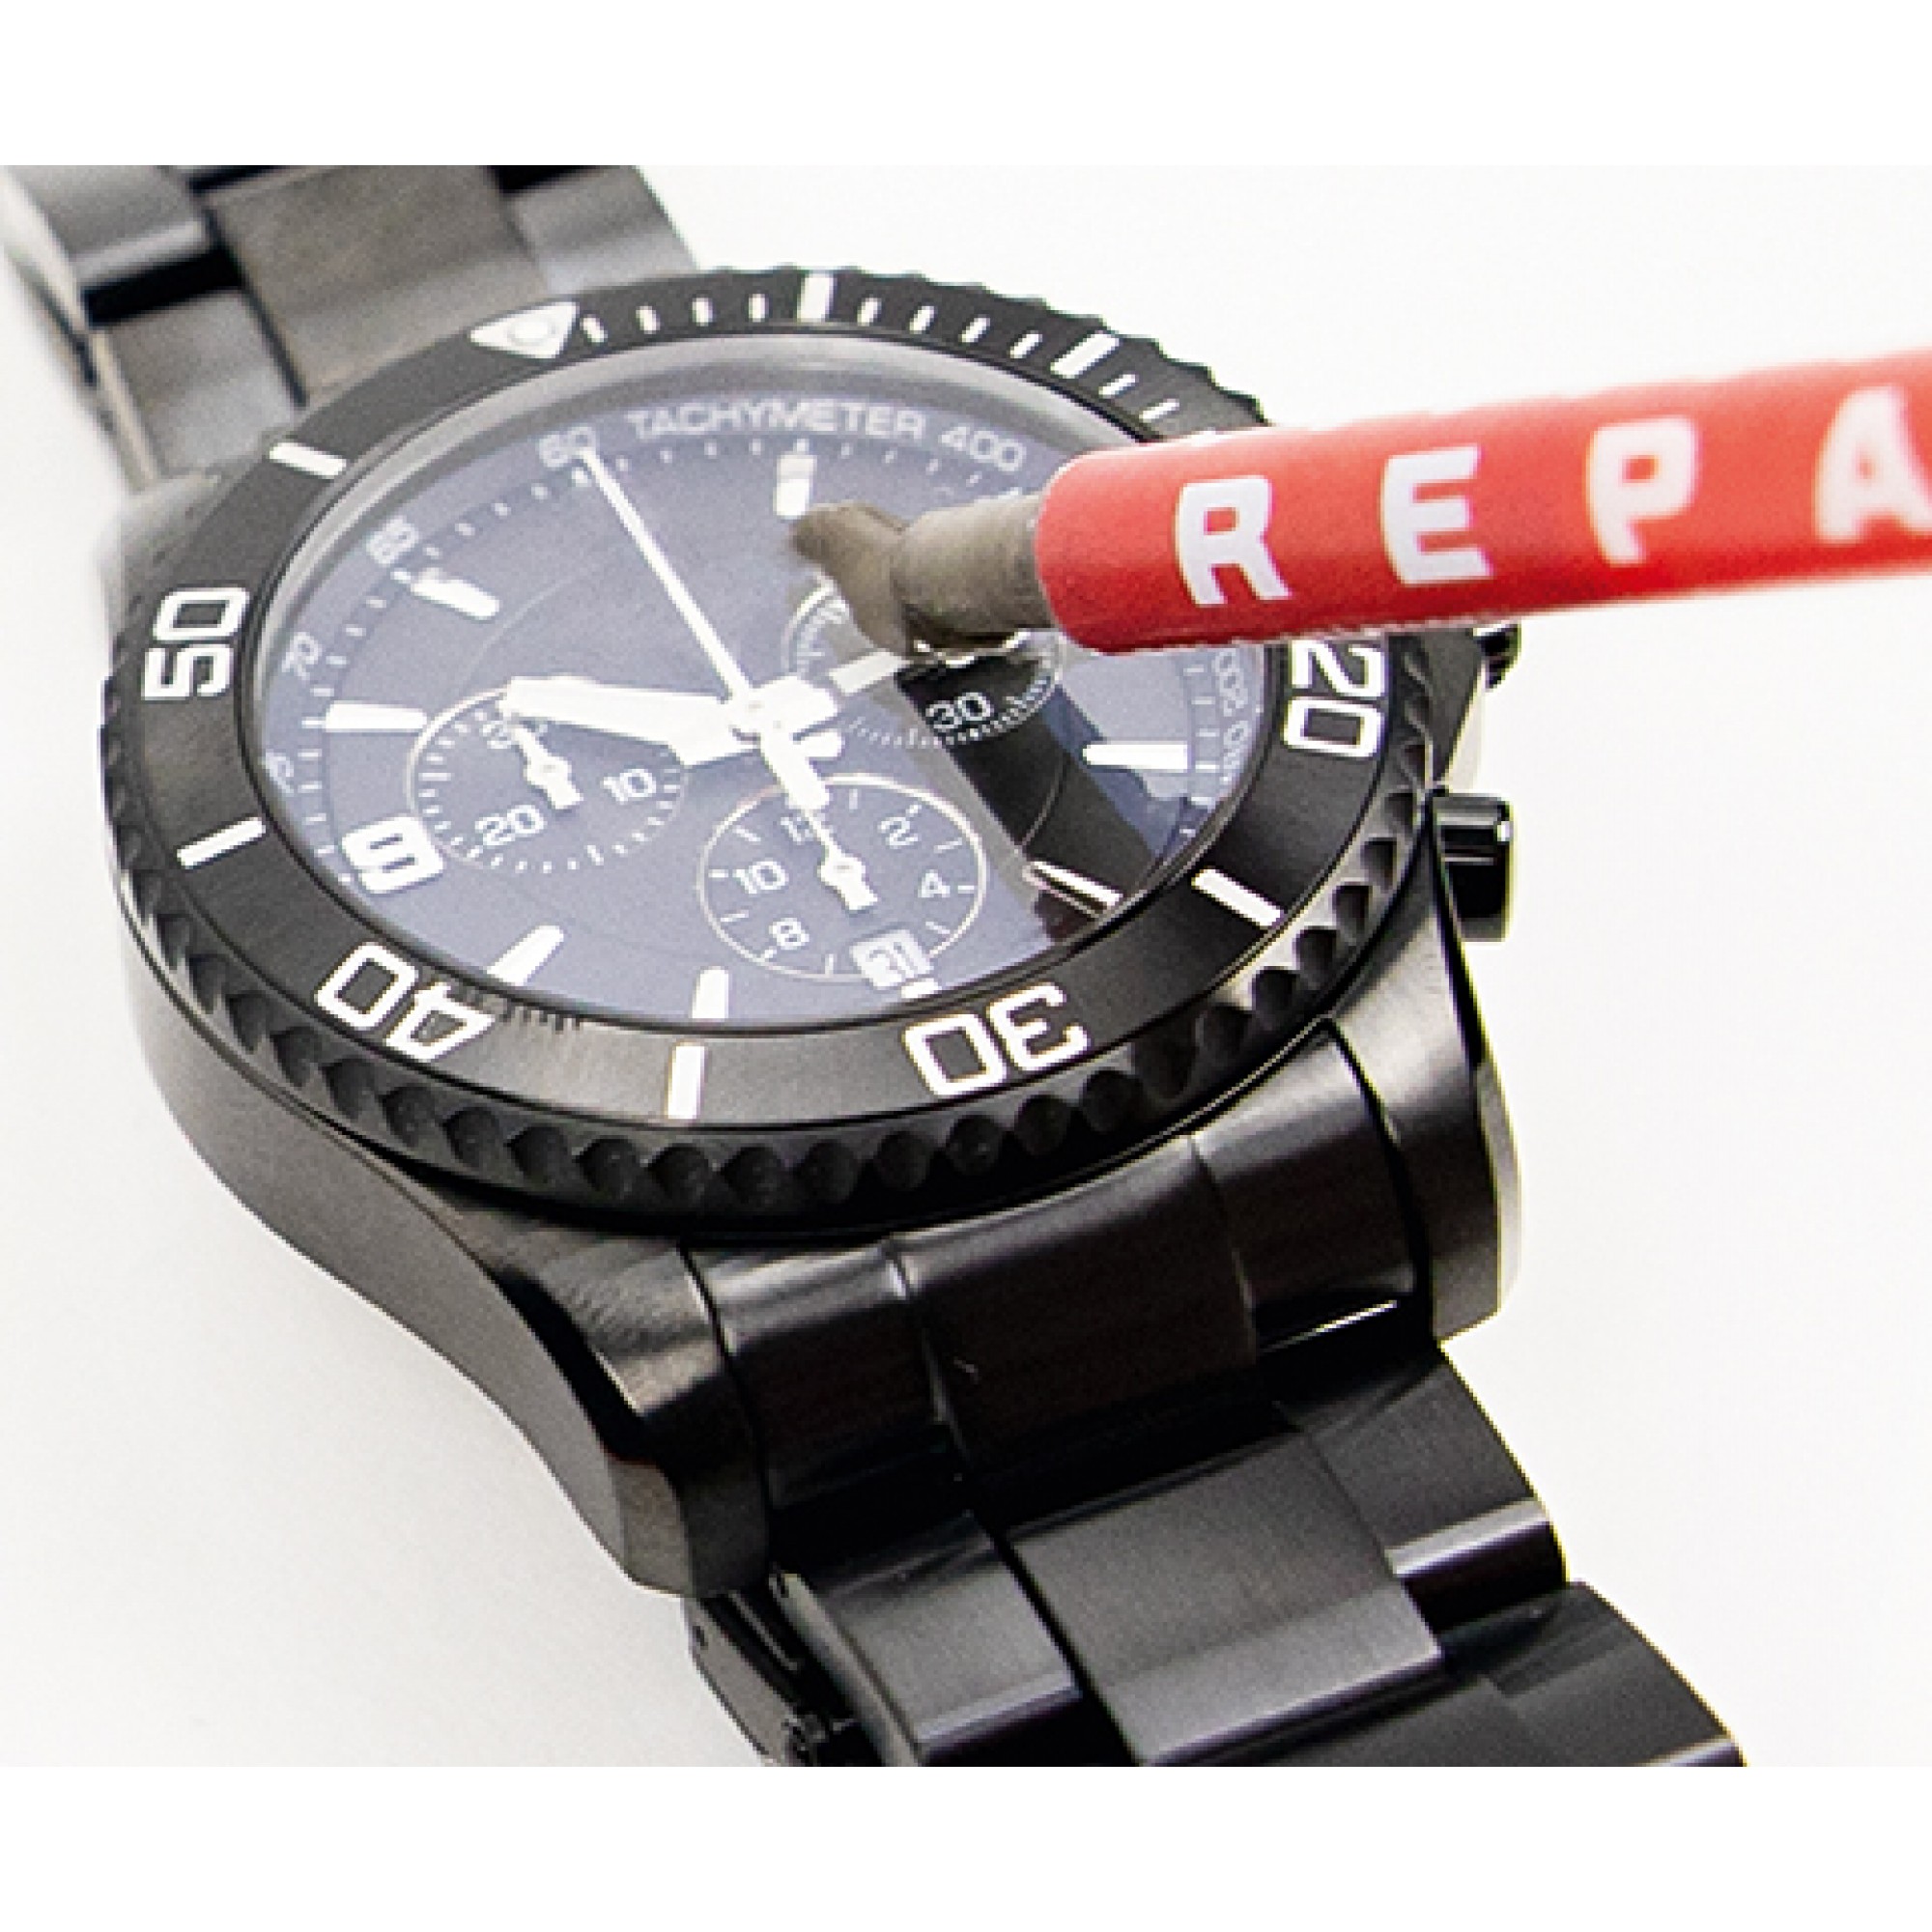 How PolyWatch Glass Polish Can Give A Cherished Timepiece A New Face